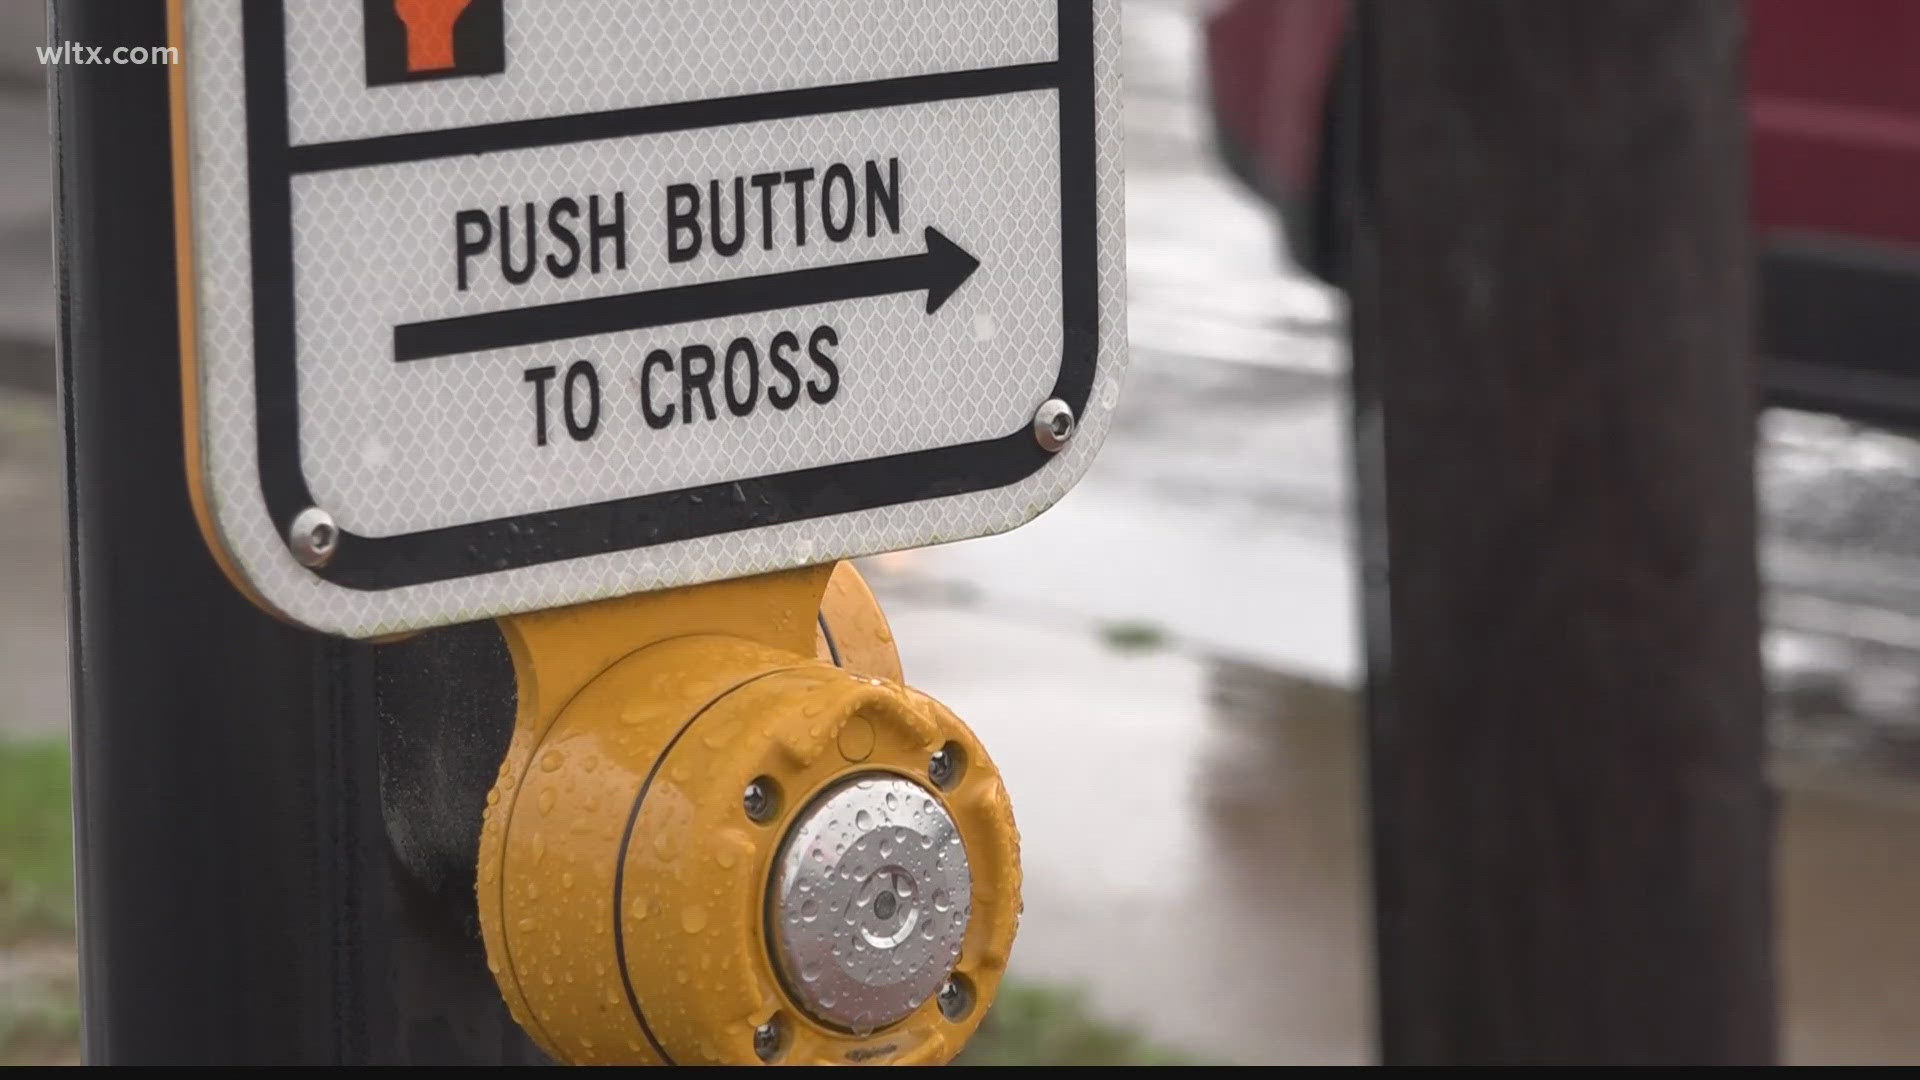 The city is looking at ways to make their most dangerous intersections safer.